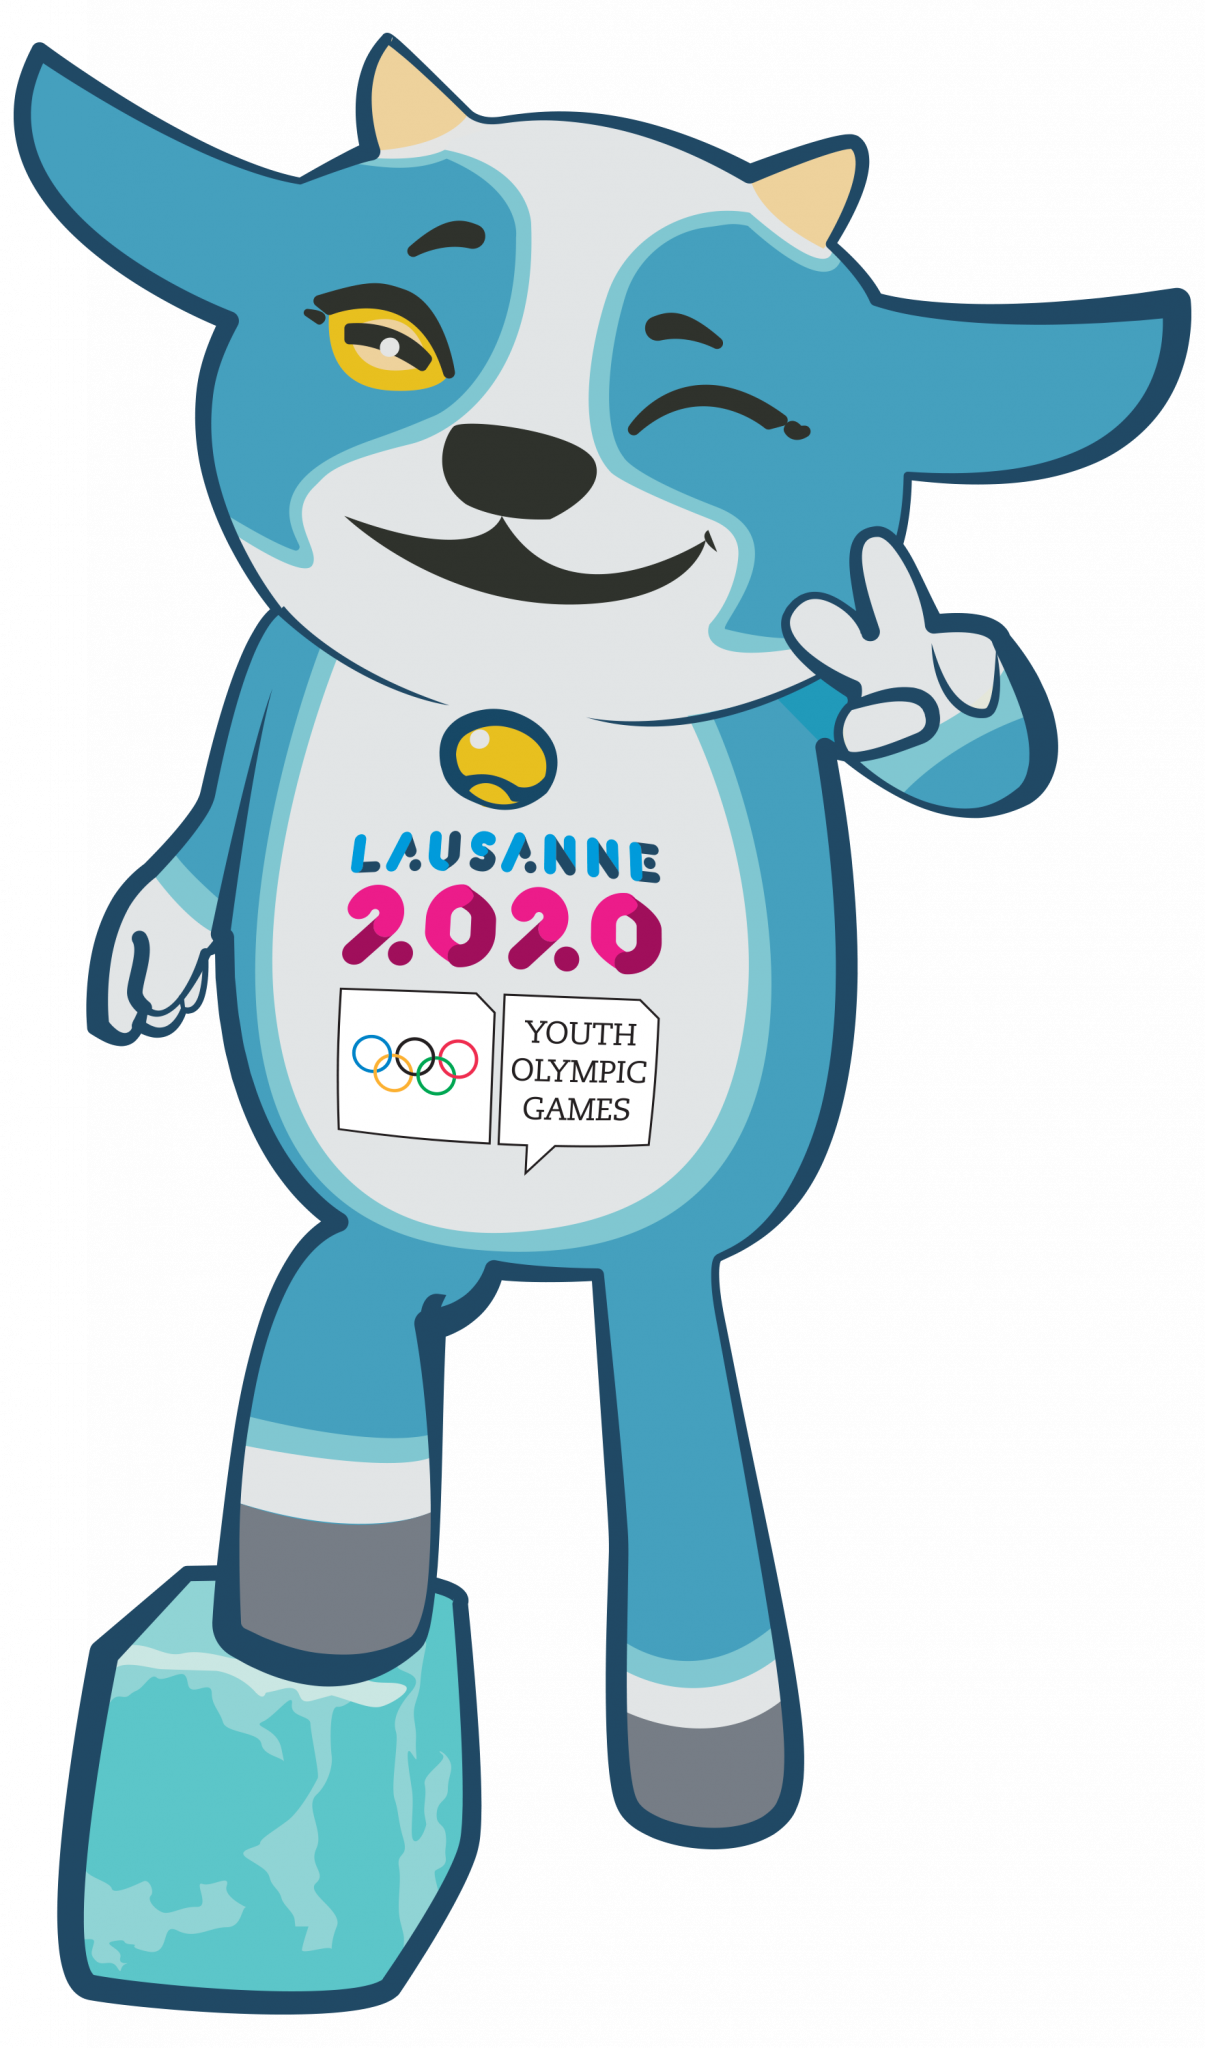 A cross between a cow, dog and goat named "Yodli" has been unveiled as the mascot for next year's Winter Youth Olympic Games in Lausanne ©Lausanne 2020